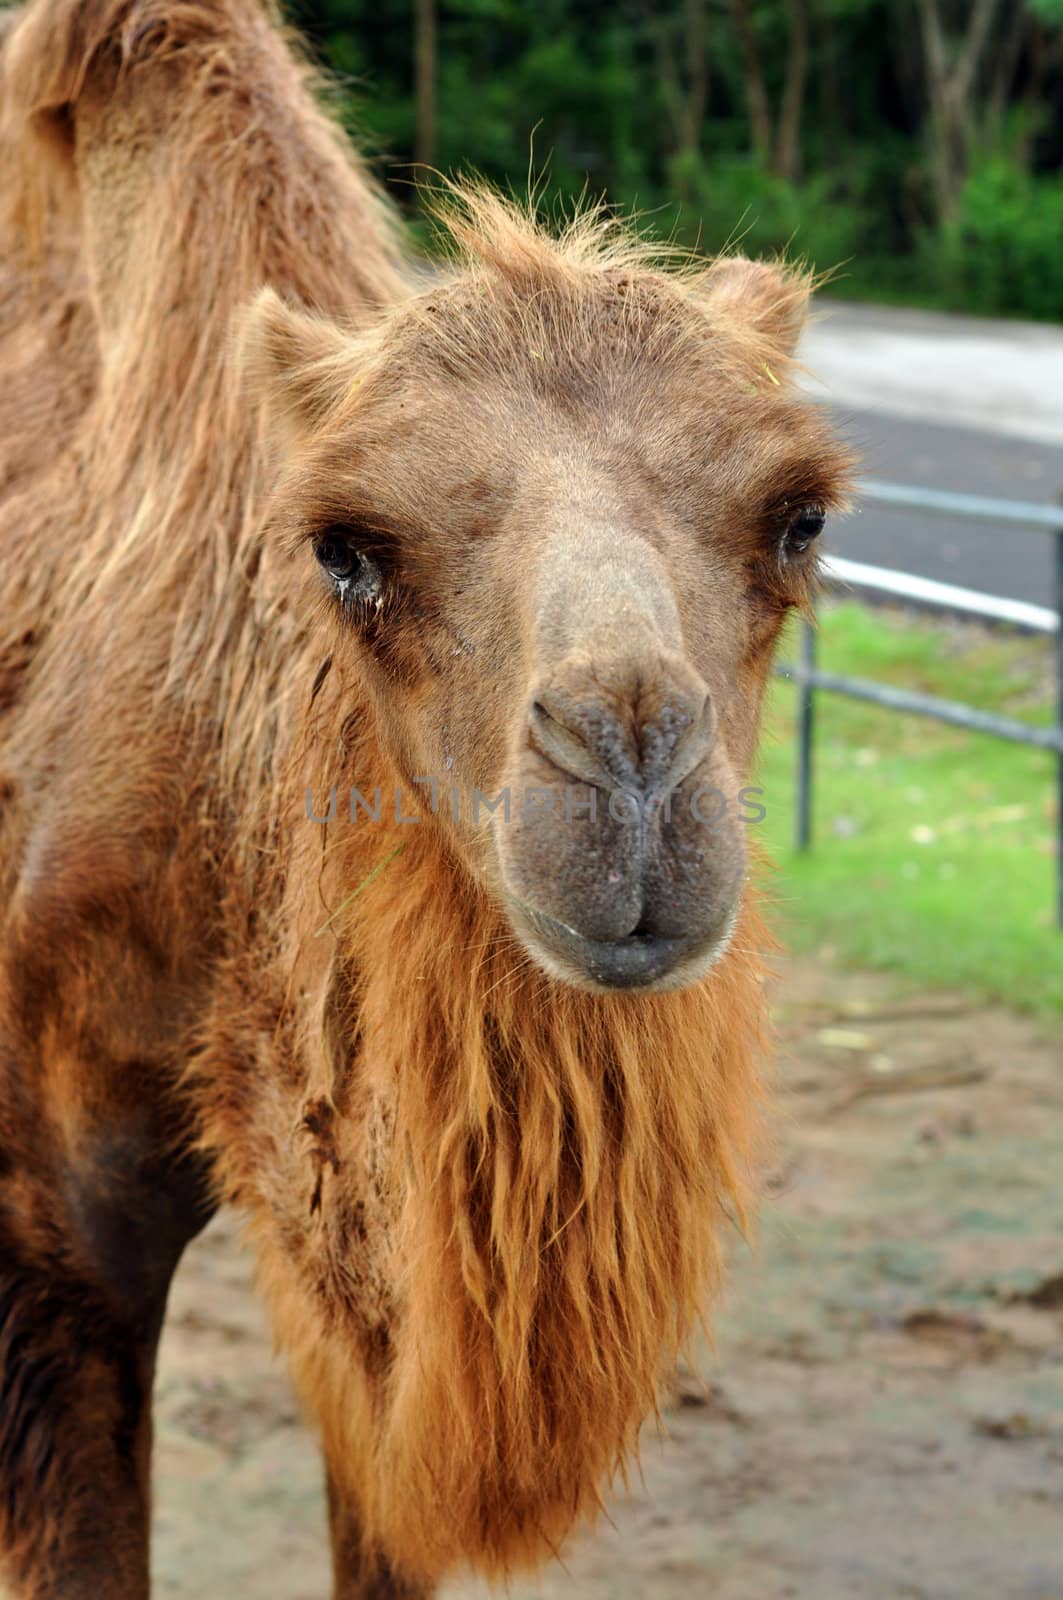 Bactrian camel by MaZiKab